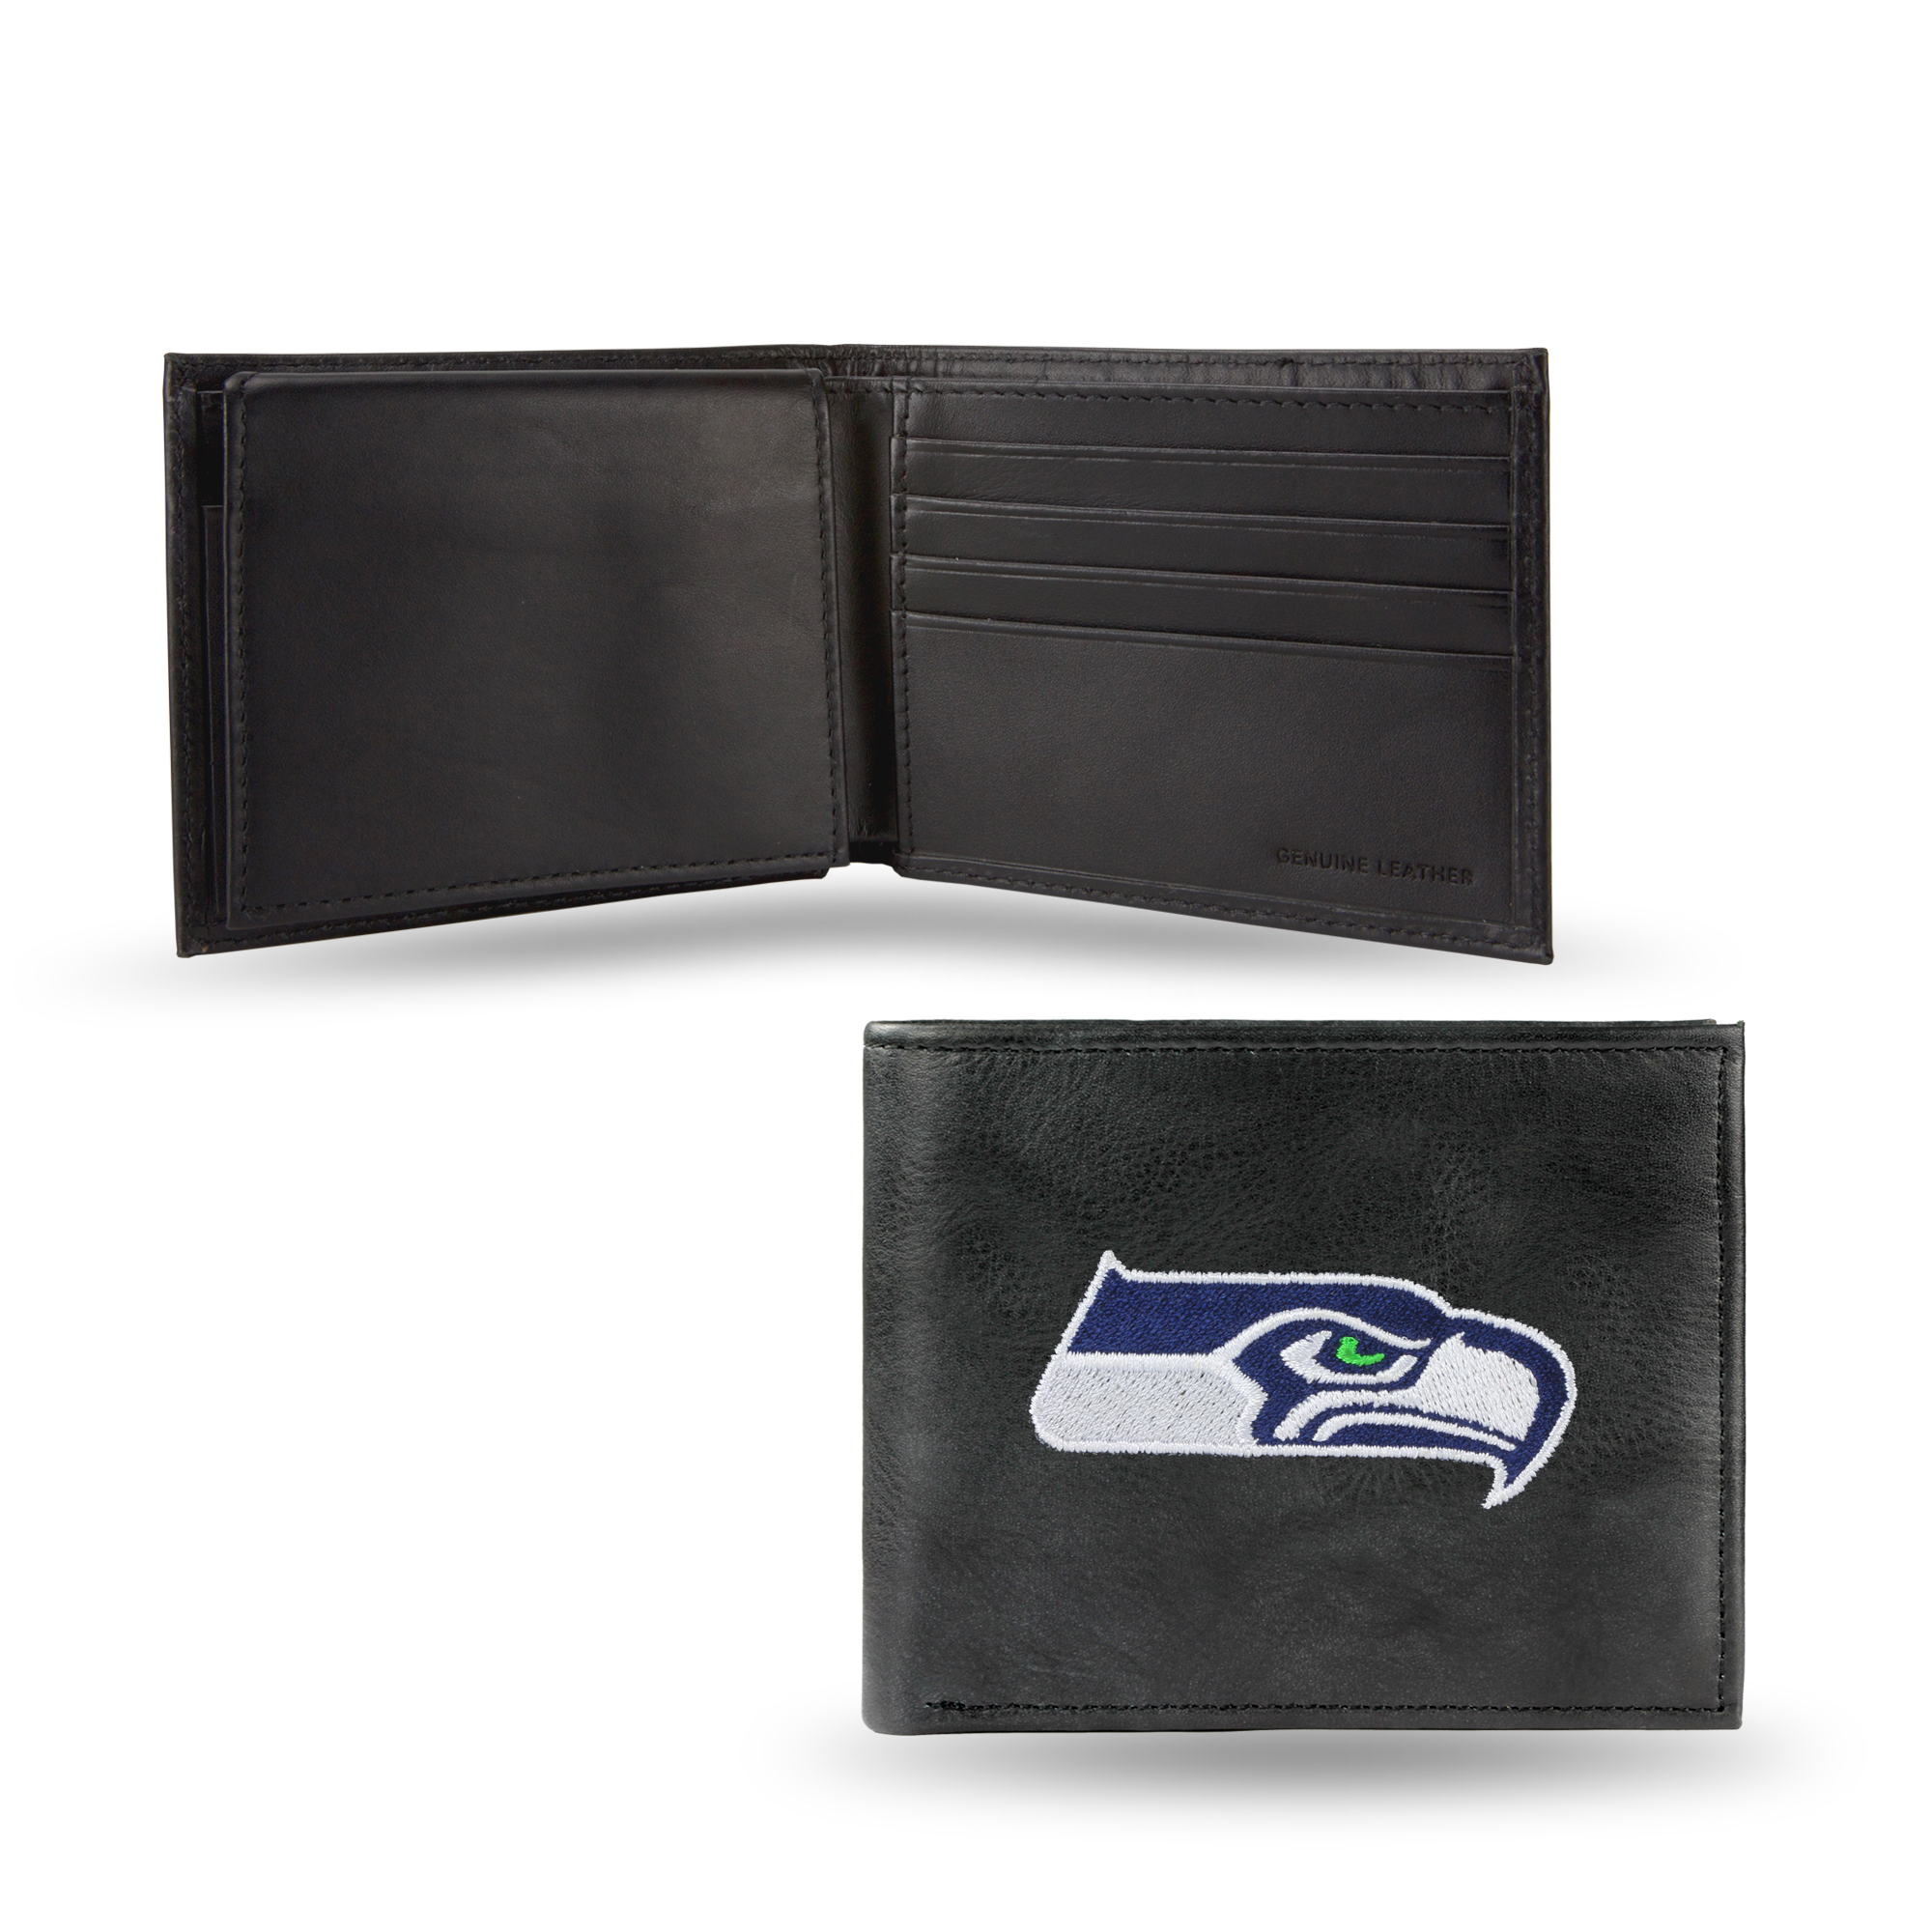 Rico Seattle Seahawks Embroidered Bi-fold Wallet